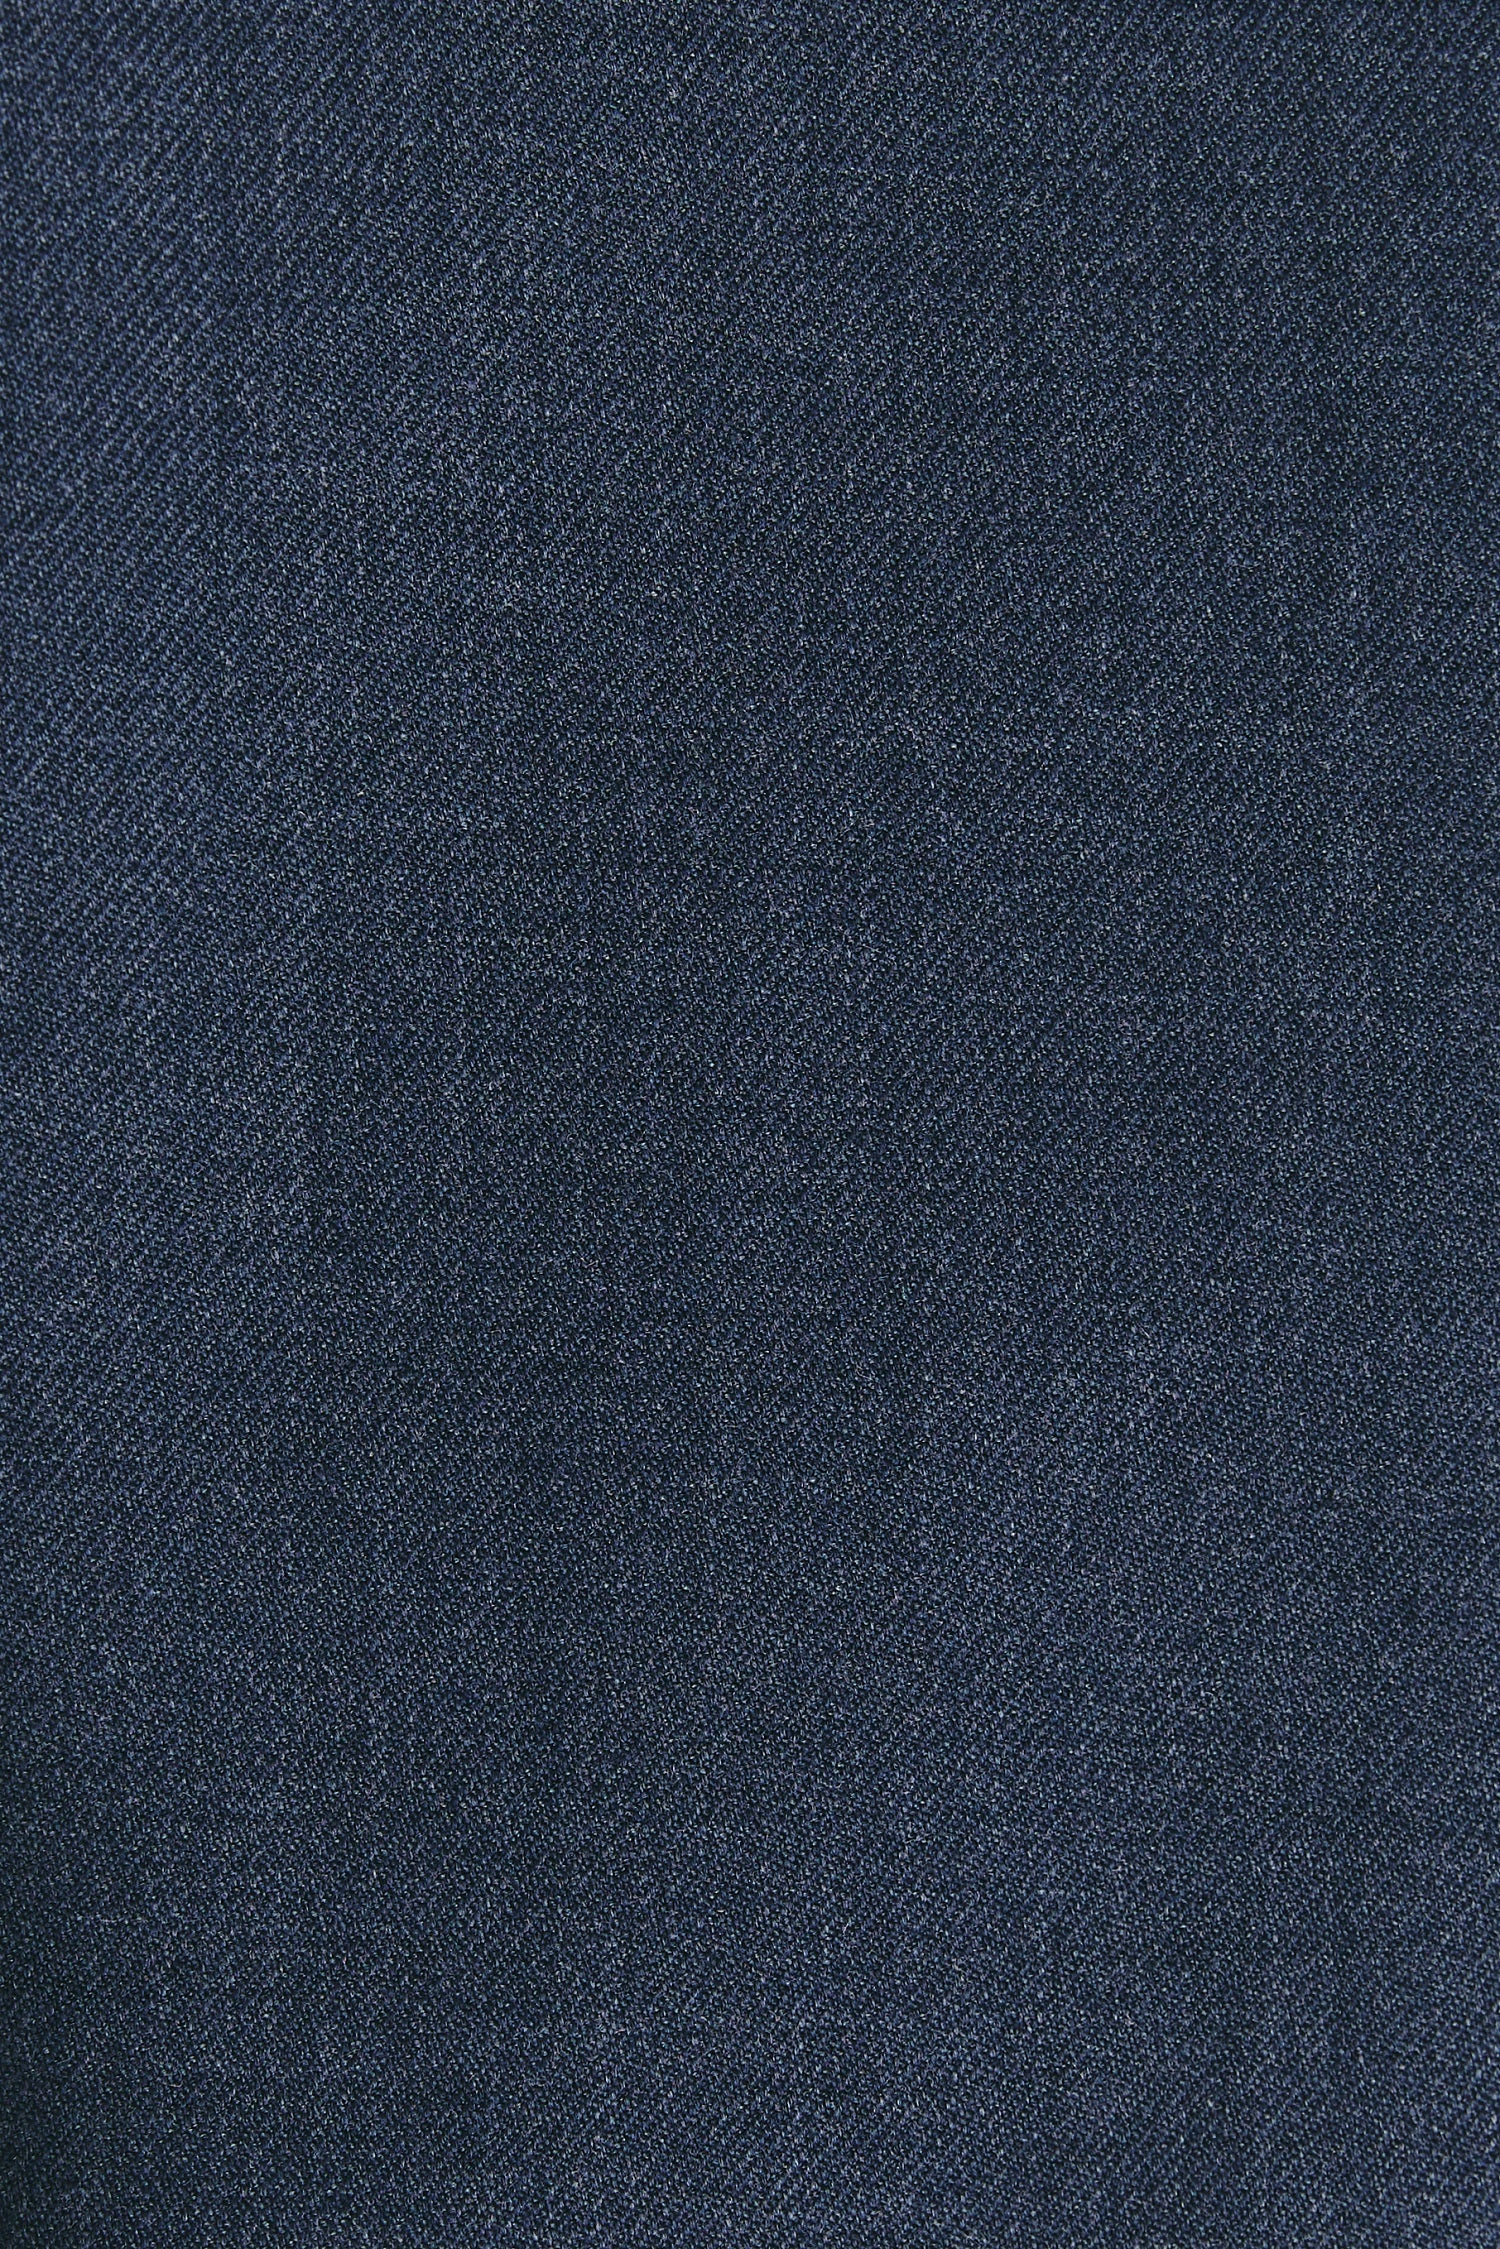 Flat-fronted in greyish blue wool